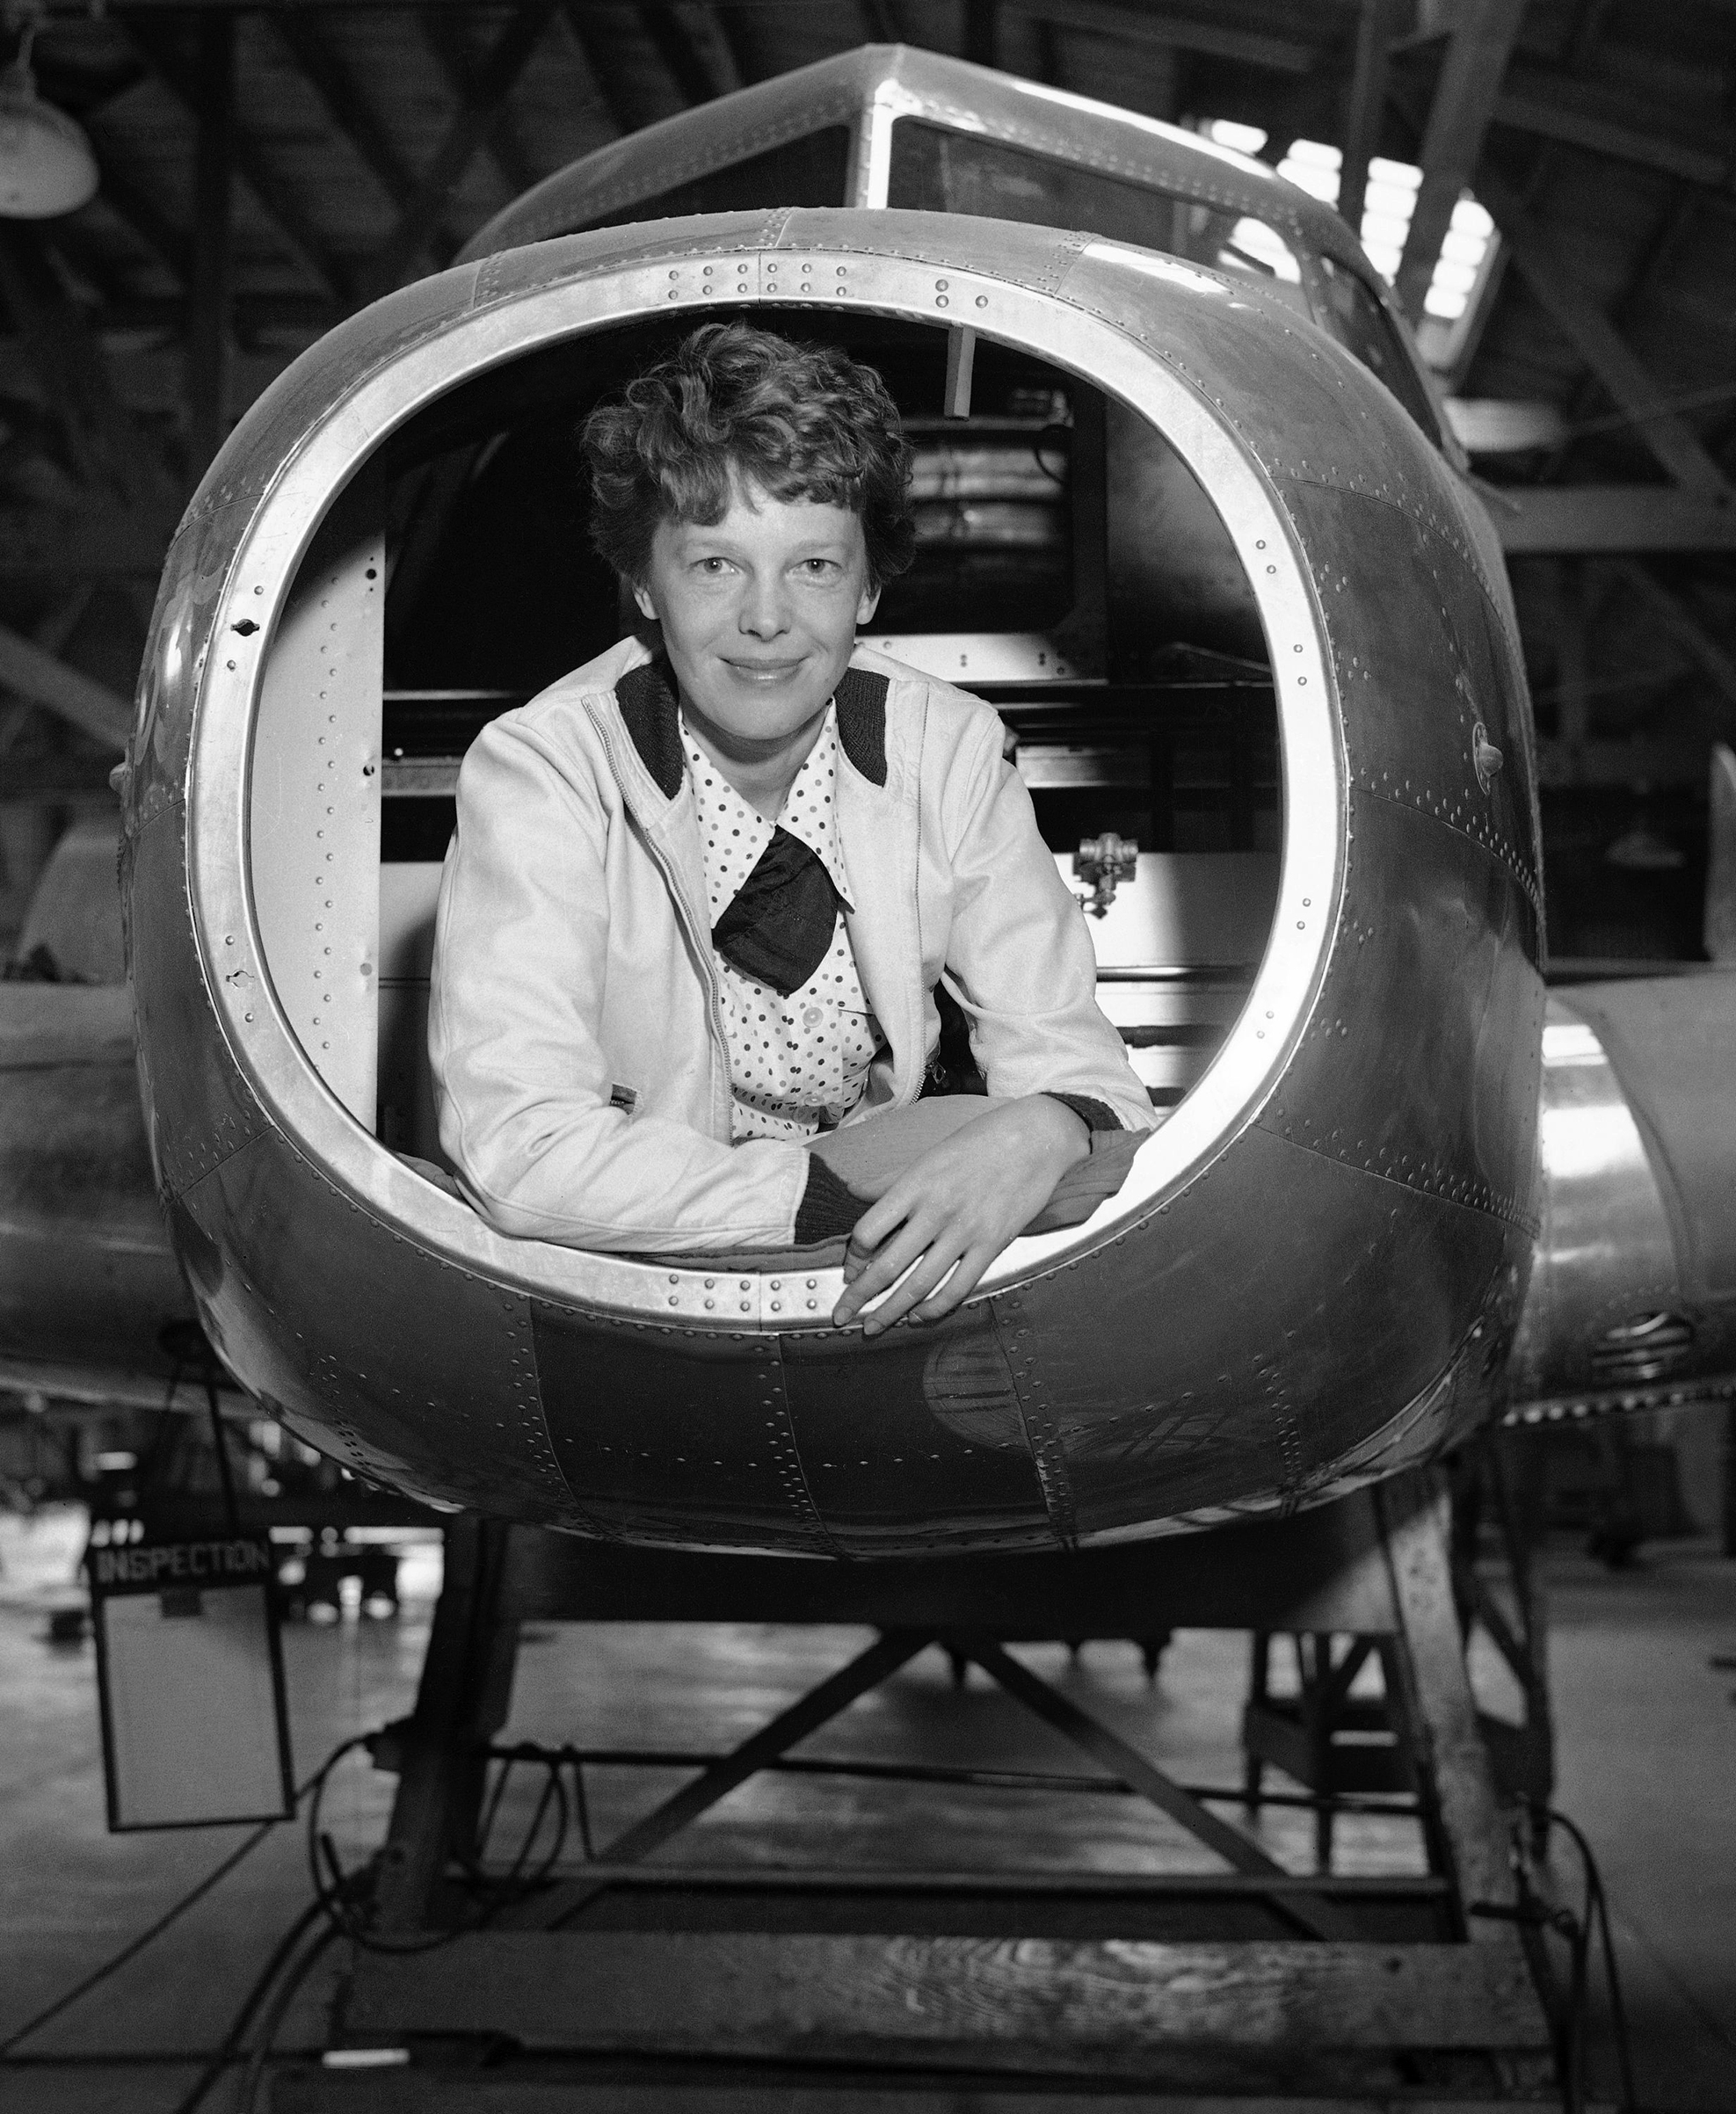 Amelia Earhart inspected the Twin-Engined Lockheed Electra Monoplane which is being built for her use in future long distance flights at the plant, May 26, 1936, Burbank, Calif.